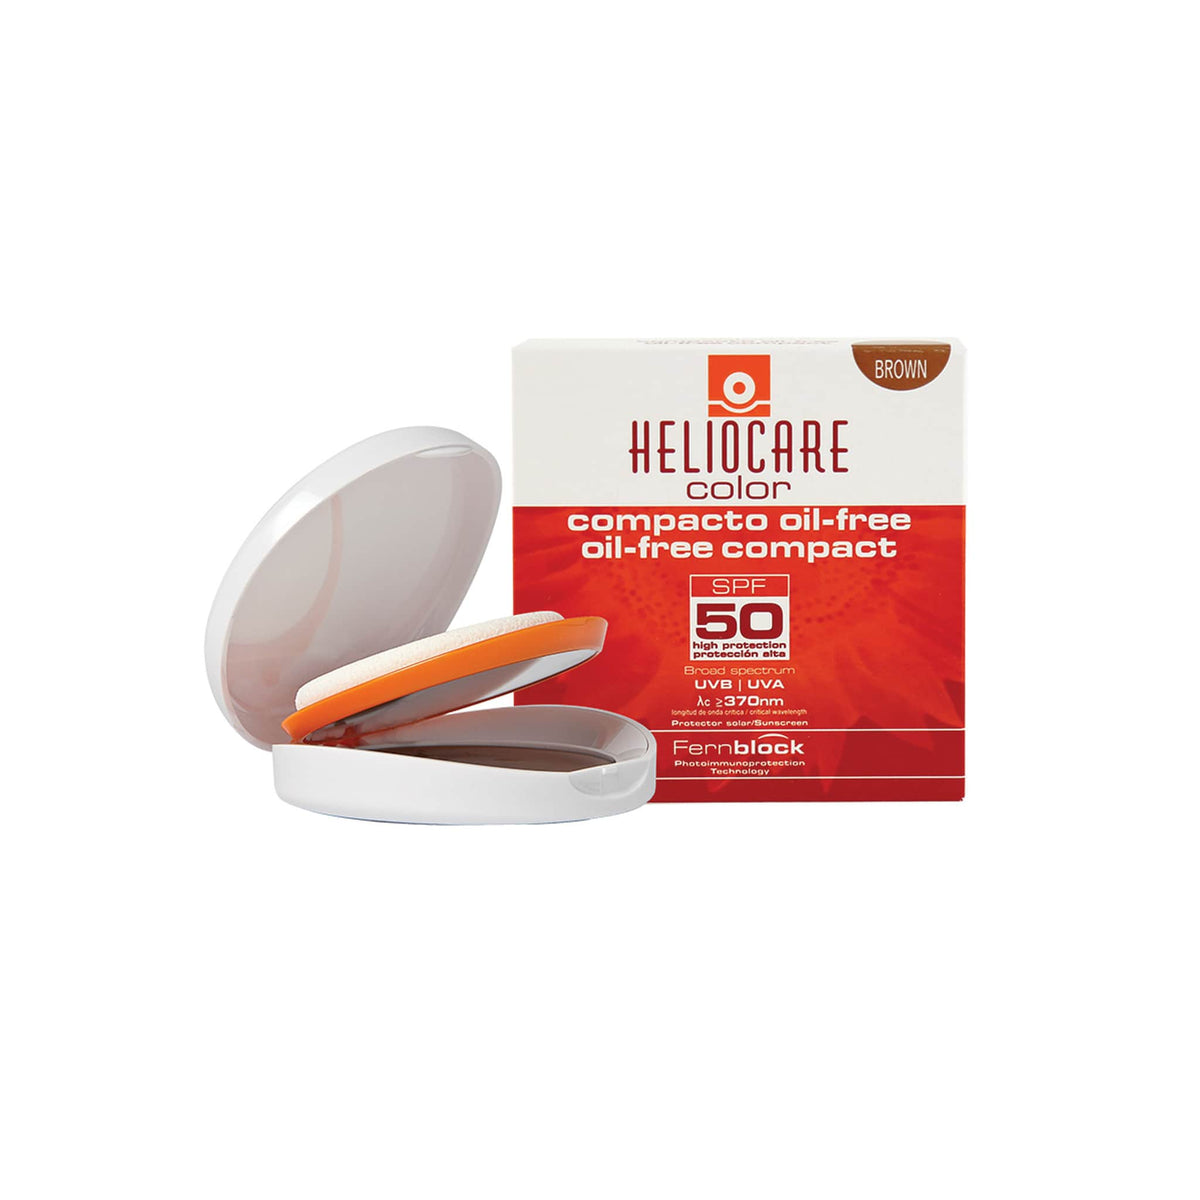 Heliocare Compact Oil Free SPF 50 10g - Shop Online | Retail Box